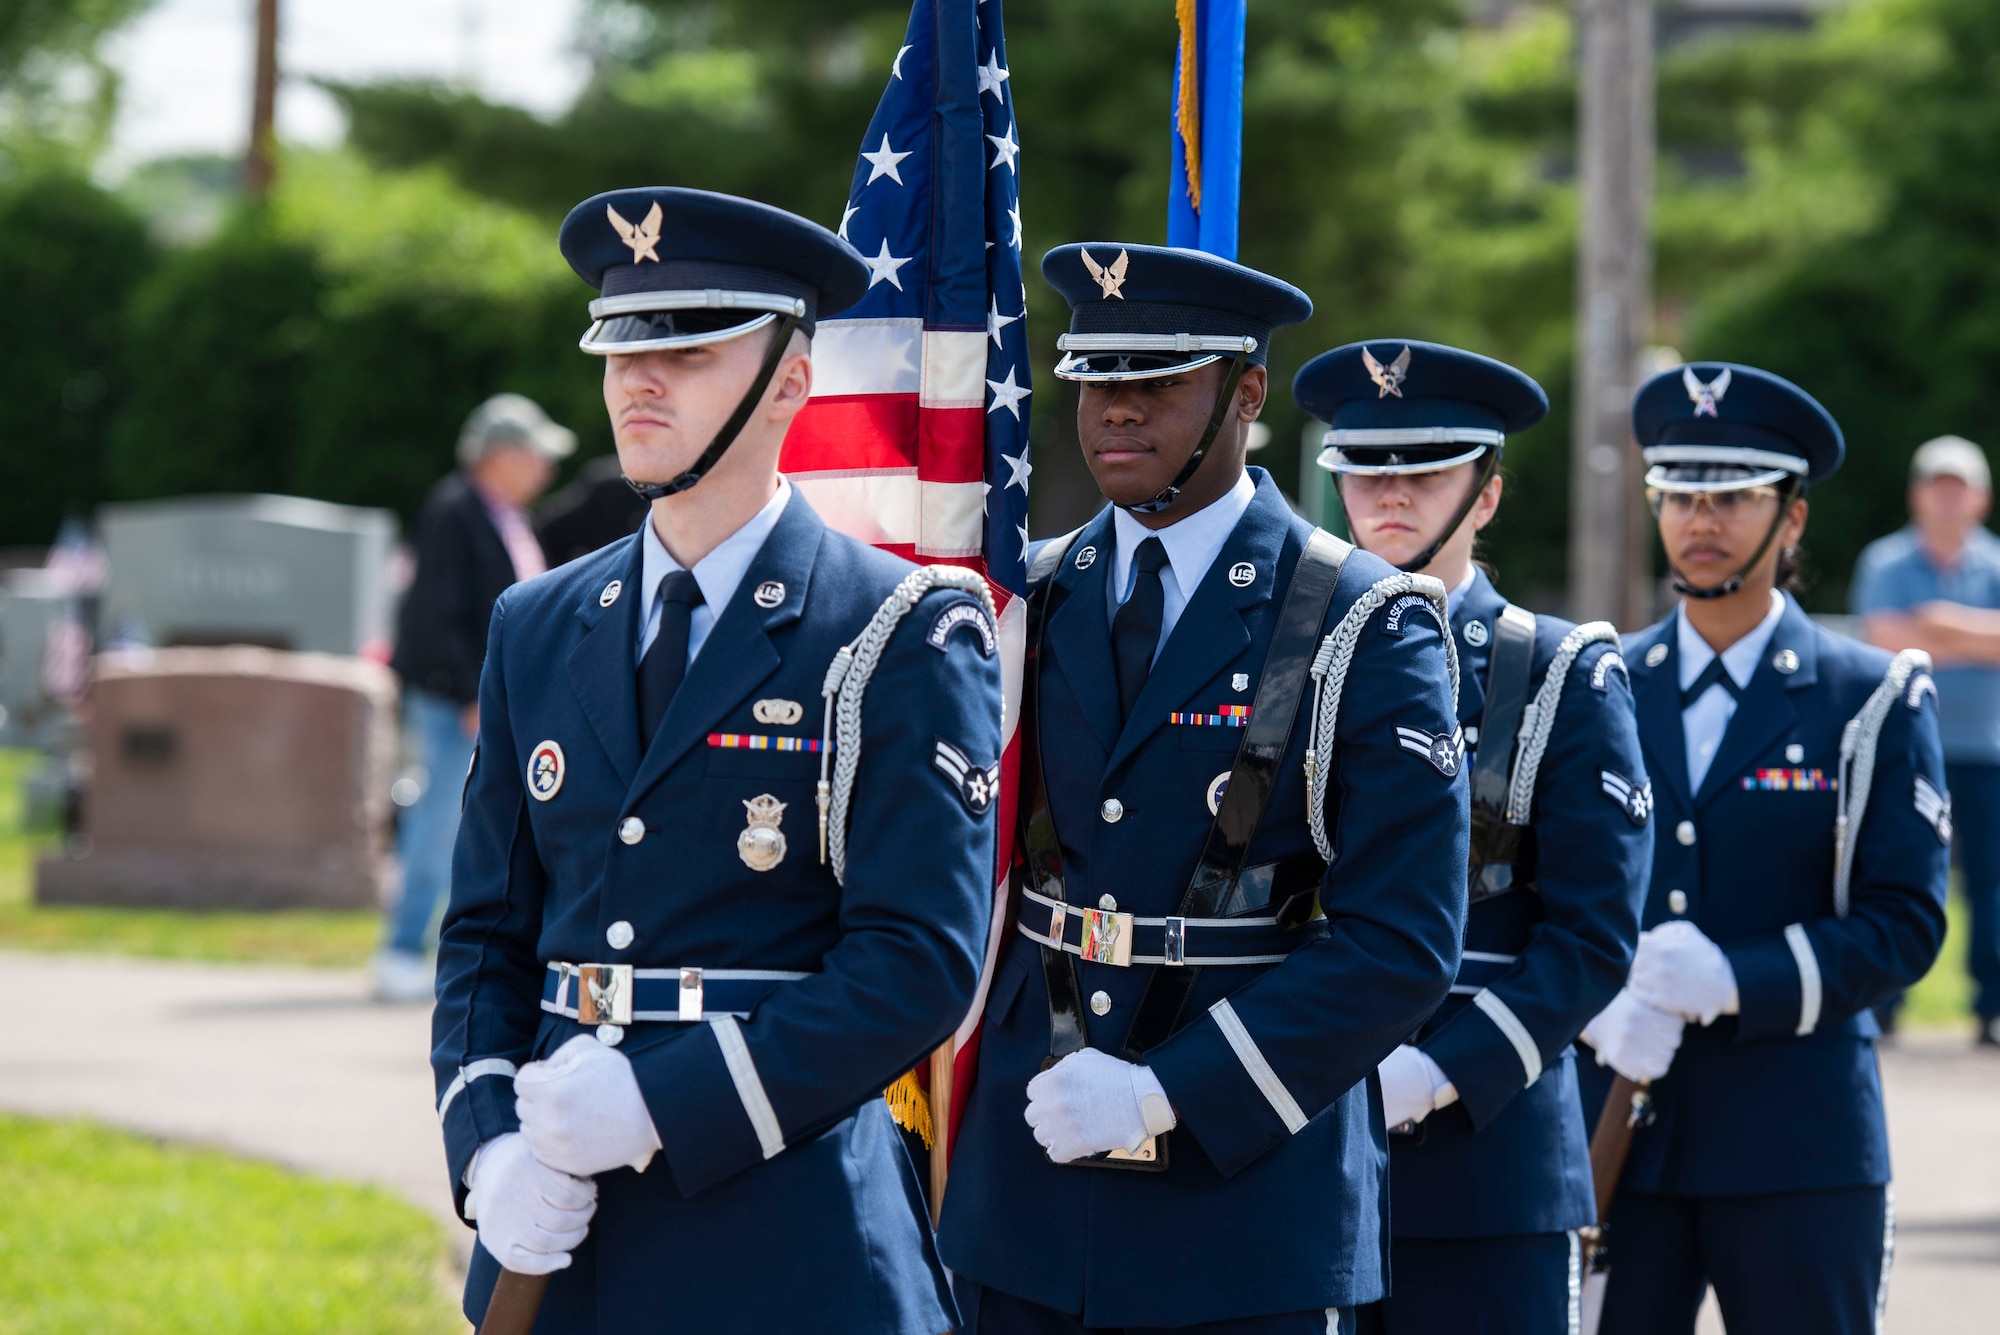 Honor Guard members from Wright-Patterson Air Force Base, Ohio, line up to present the colors during a Memorial Day ceremony in Fairborn, Ohio, May 31, 2021. Established in 1971, Memorial Day is an official federal holiday meant to allow people to honor the men and women who have died while on duty with the U.S. Military. (U.S. Air Force photo by Wesley Farnsworth)